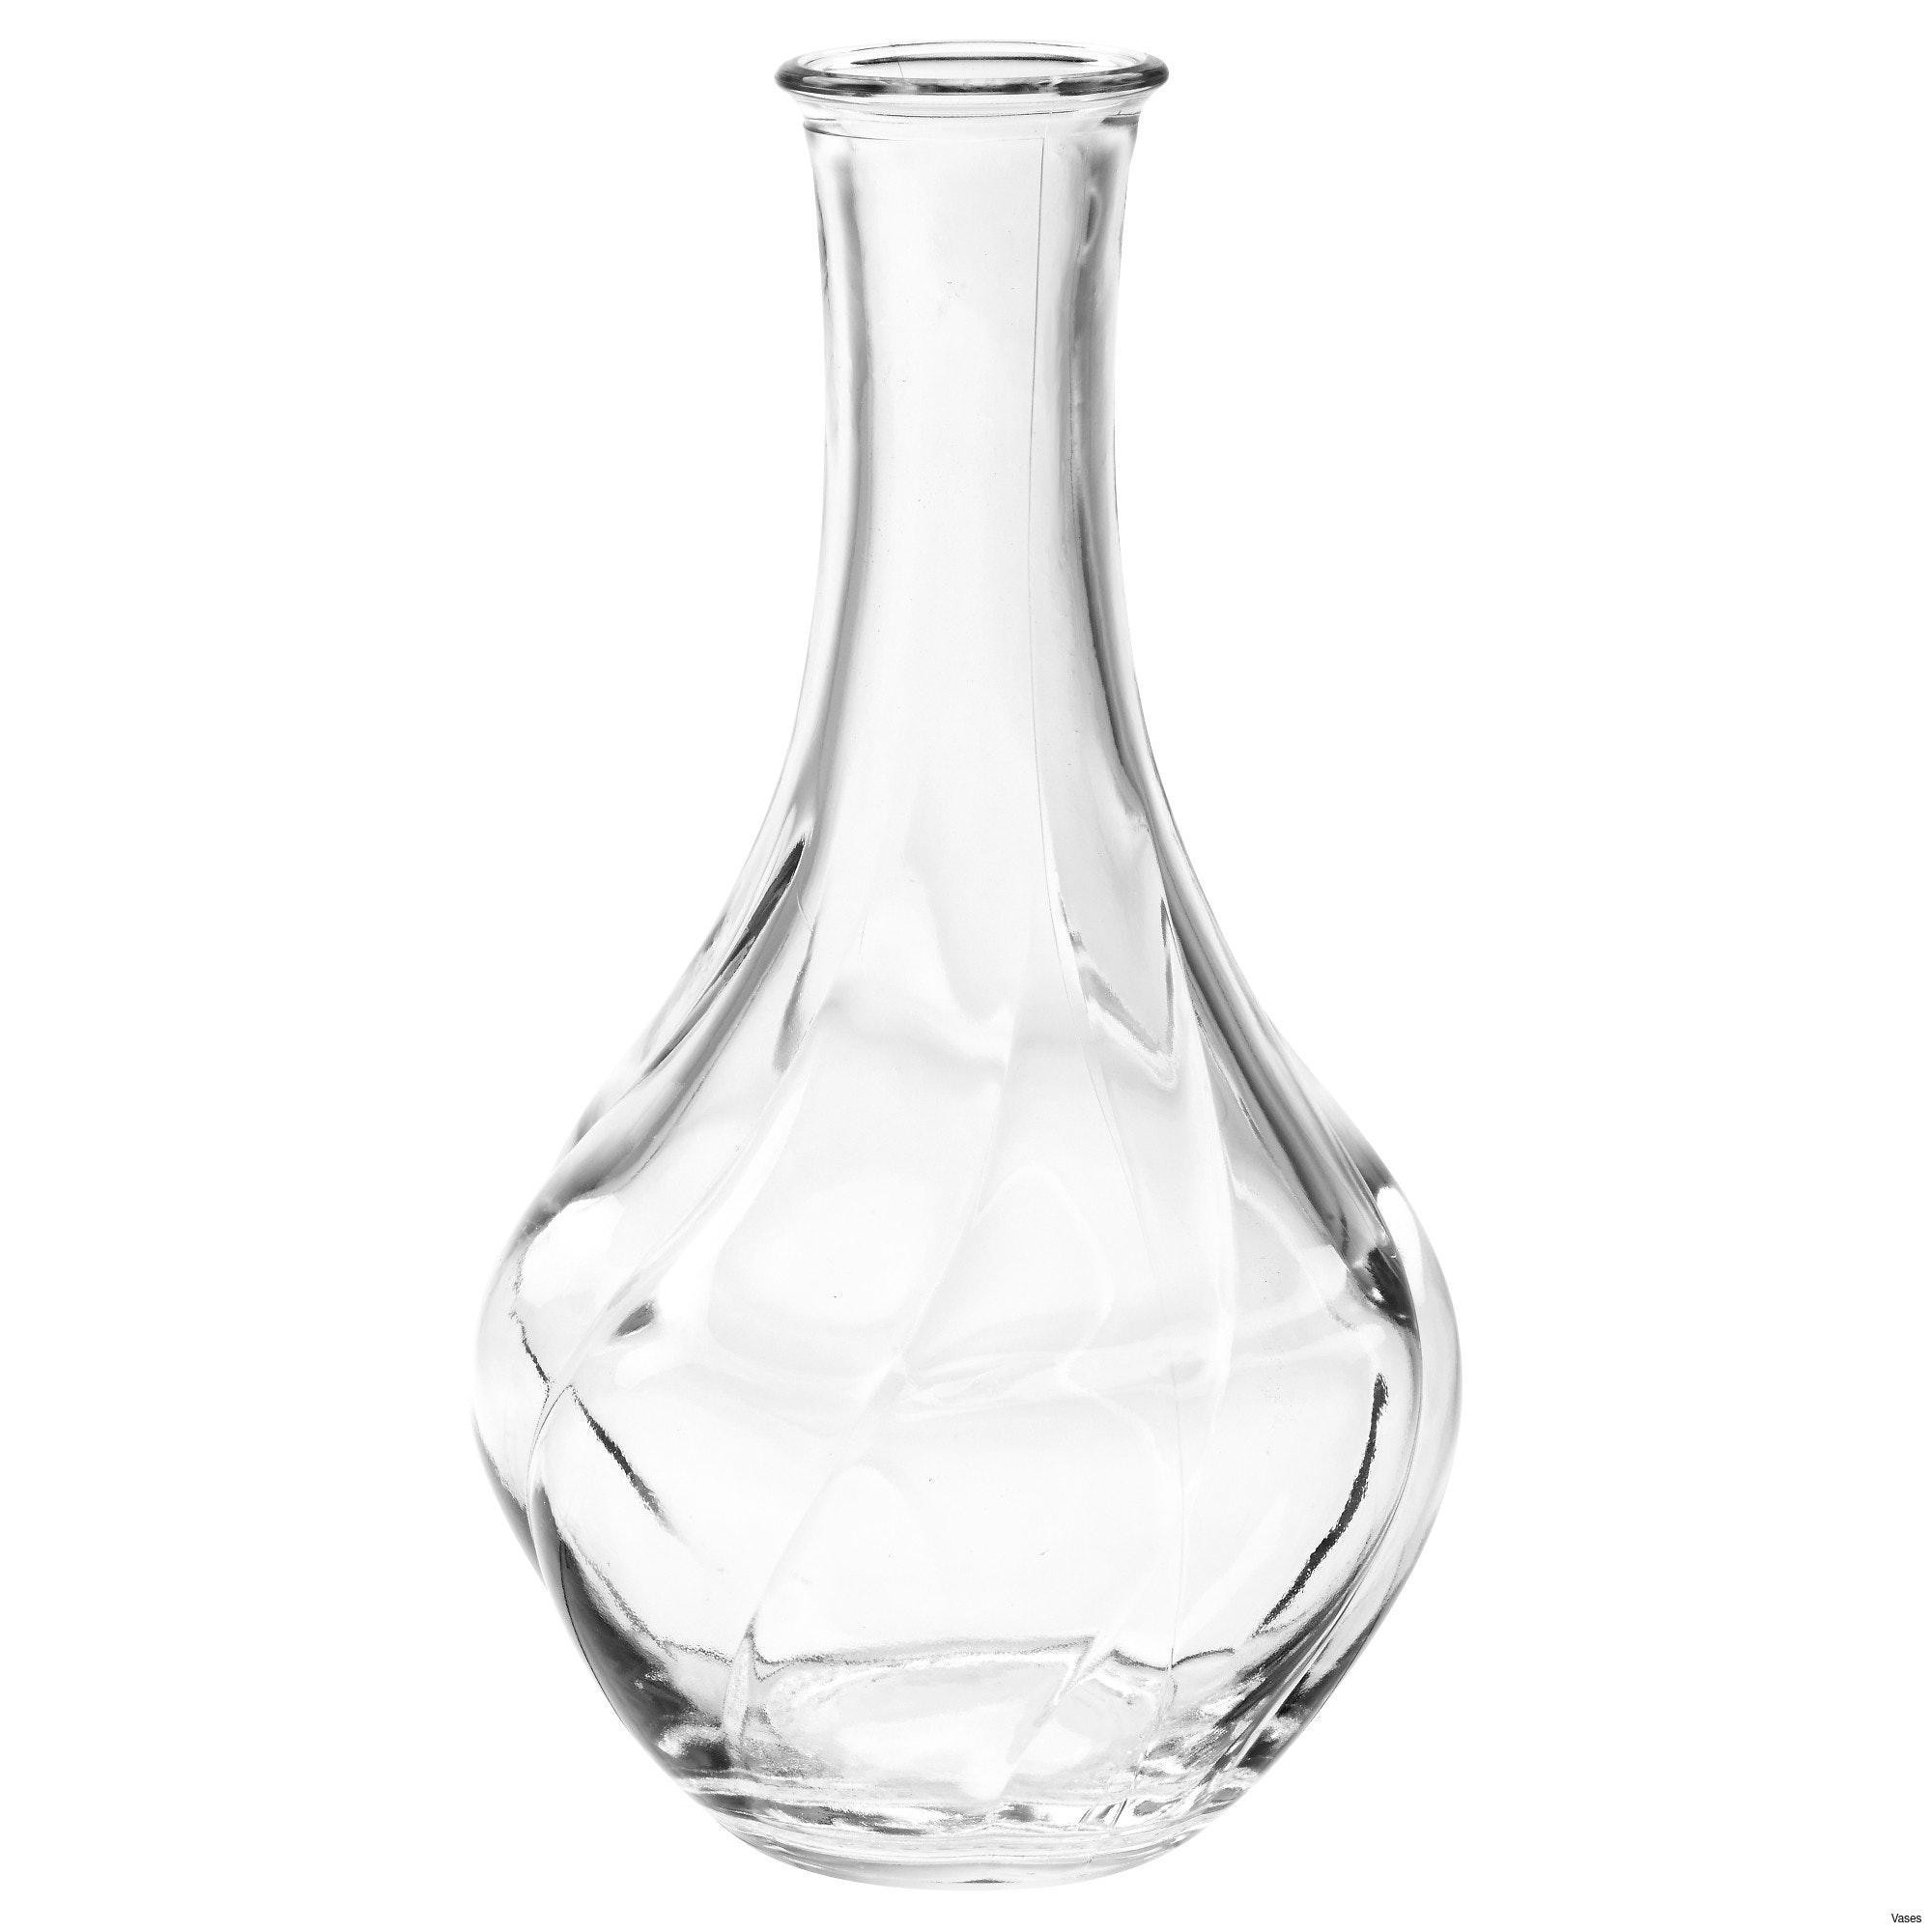 18 Fabulous Discount Glass Cylinder Vases 2024 free download discount glass cylinder vases of living room large glass vases fresh clear vase 0d tags amazing and pertaining to living room large glass vases fresh clear vase 0d tags amazing and also whit